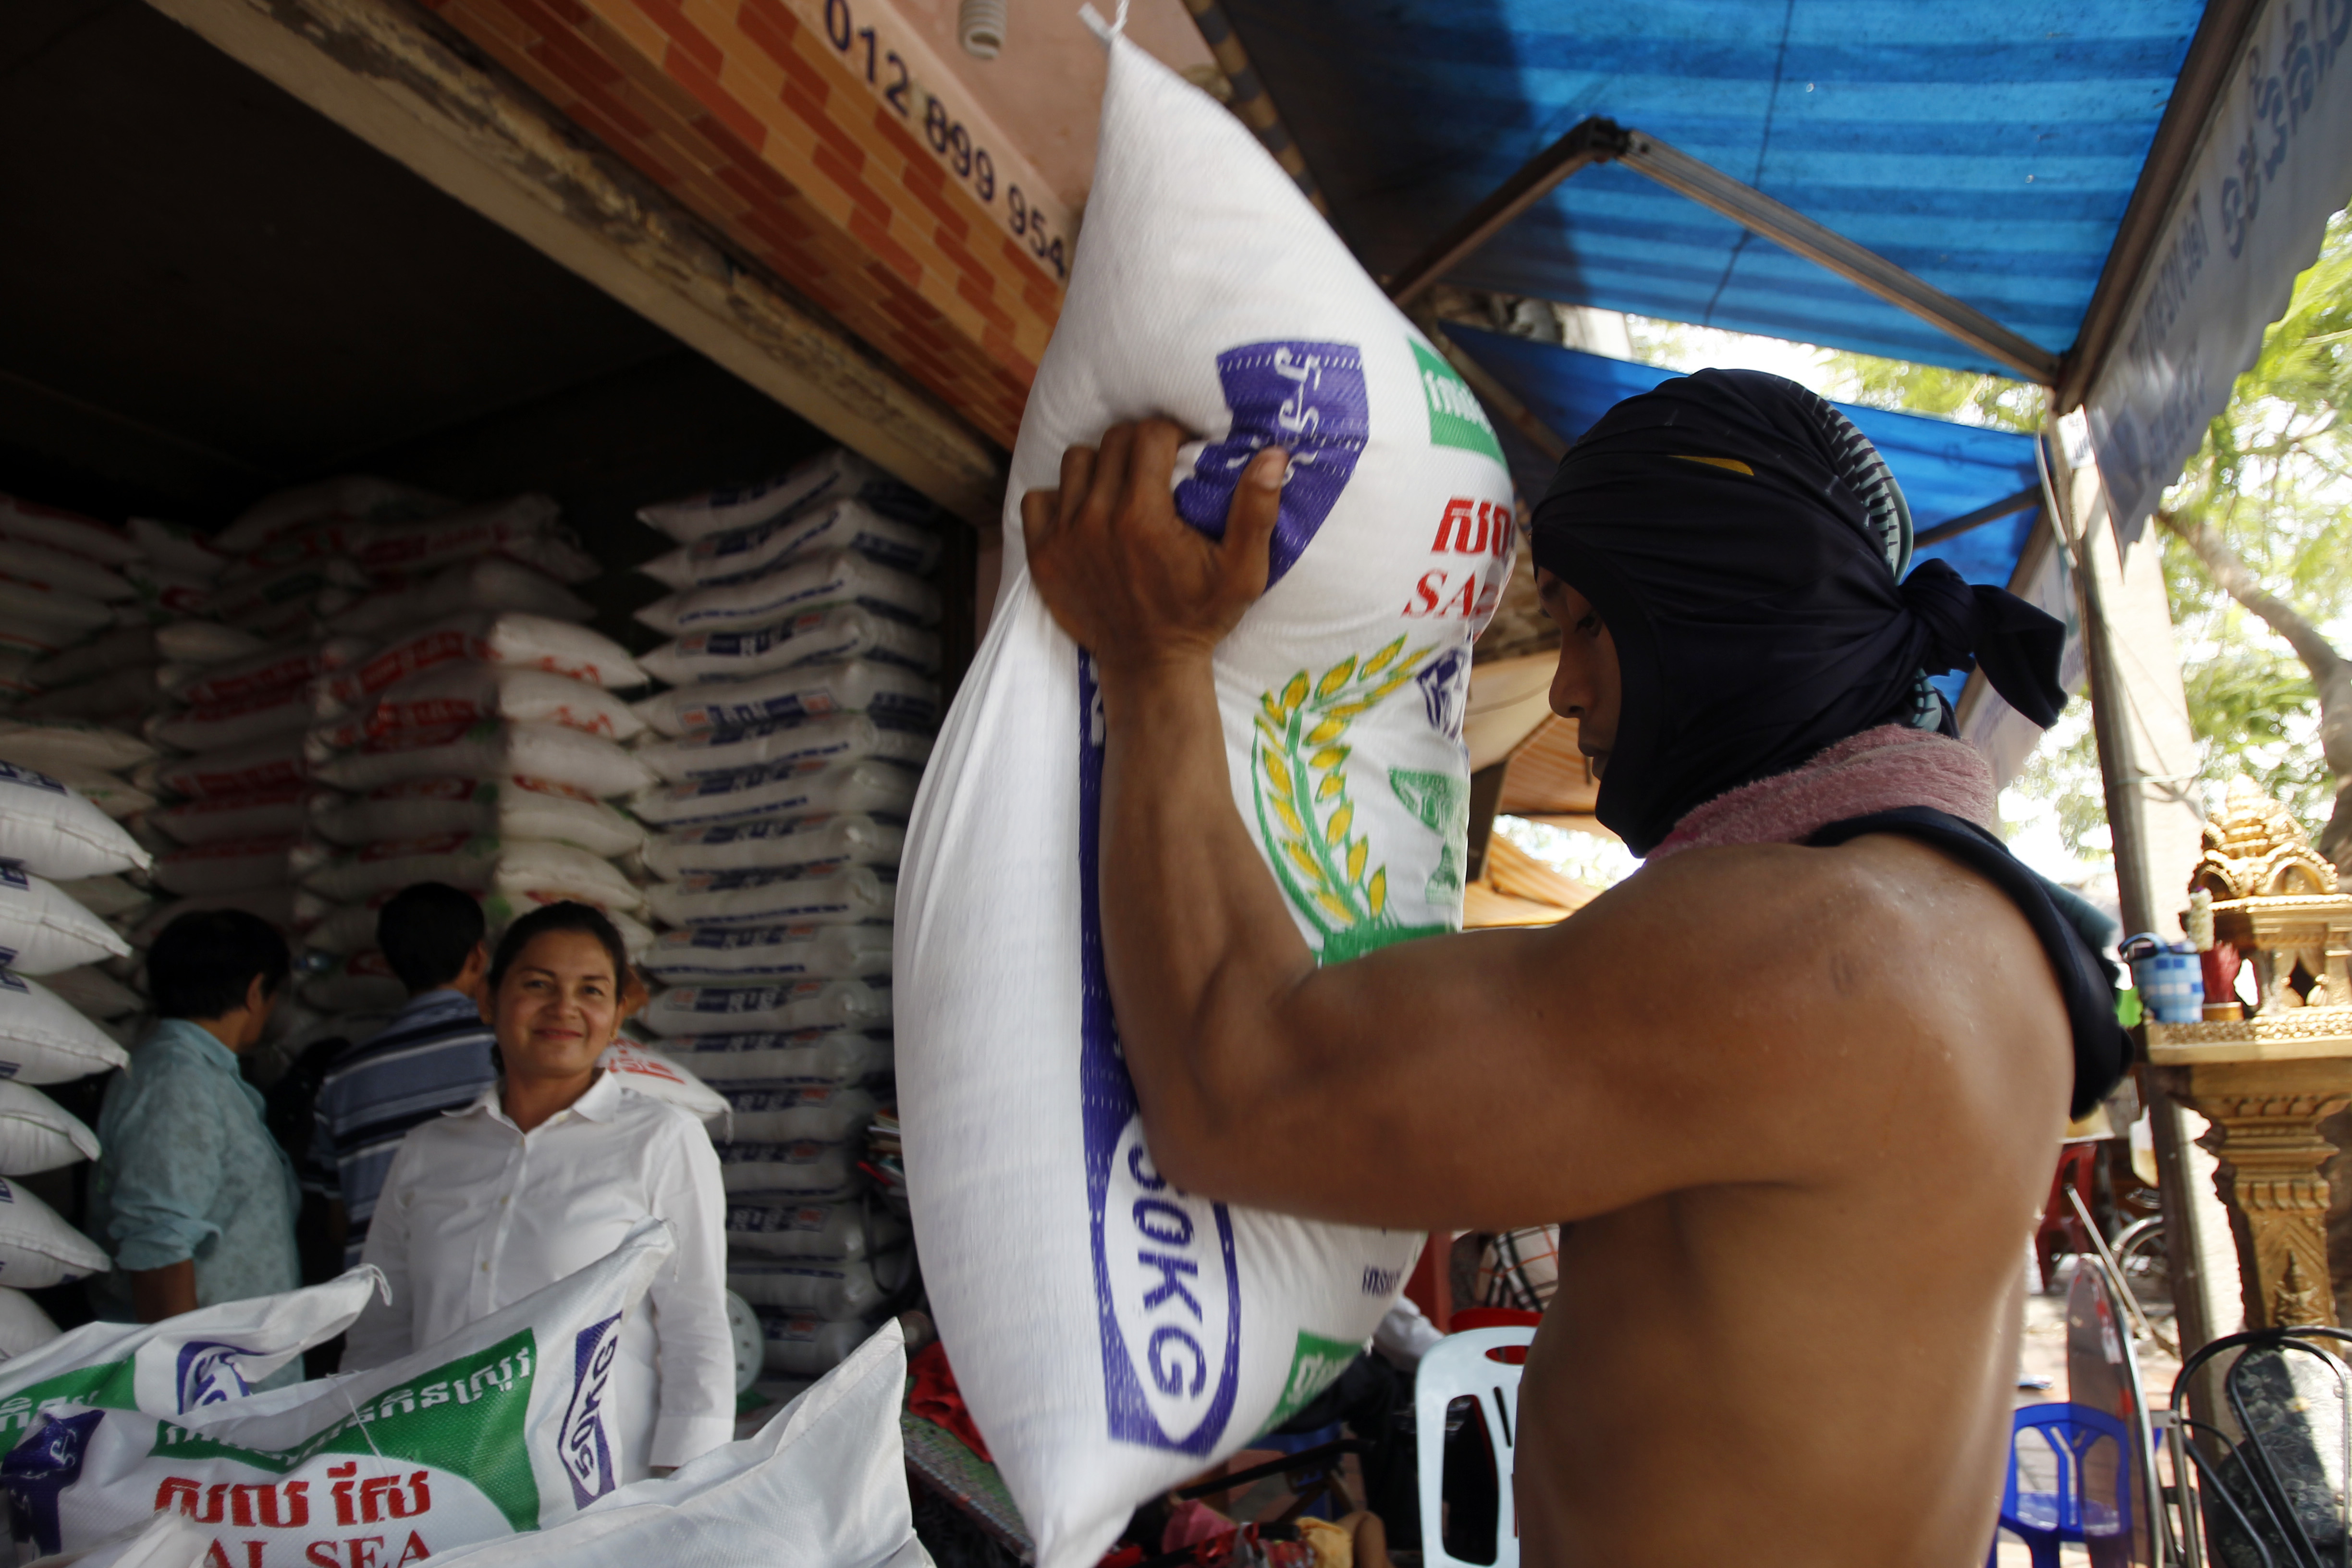 A Cambodian worker, right, holds a rice sack as he prepares it to sell at a rice store in Phnom Penh, Cambodia, Saturday, April 27, 2019. Cambodia's close friend China agreed to buy 400,000 tons of rice from Cambodia for this year and next year. (AP Photo/Heng Sinith)